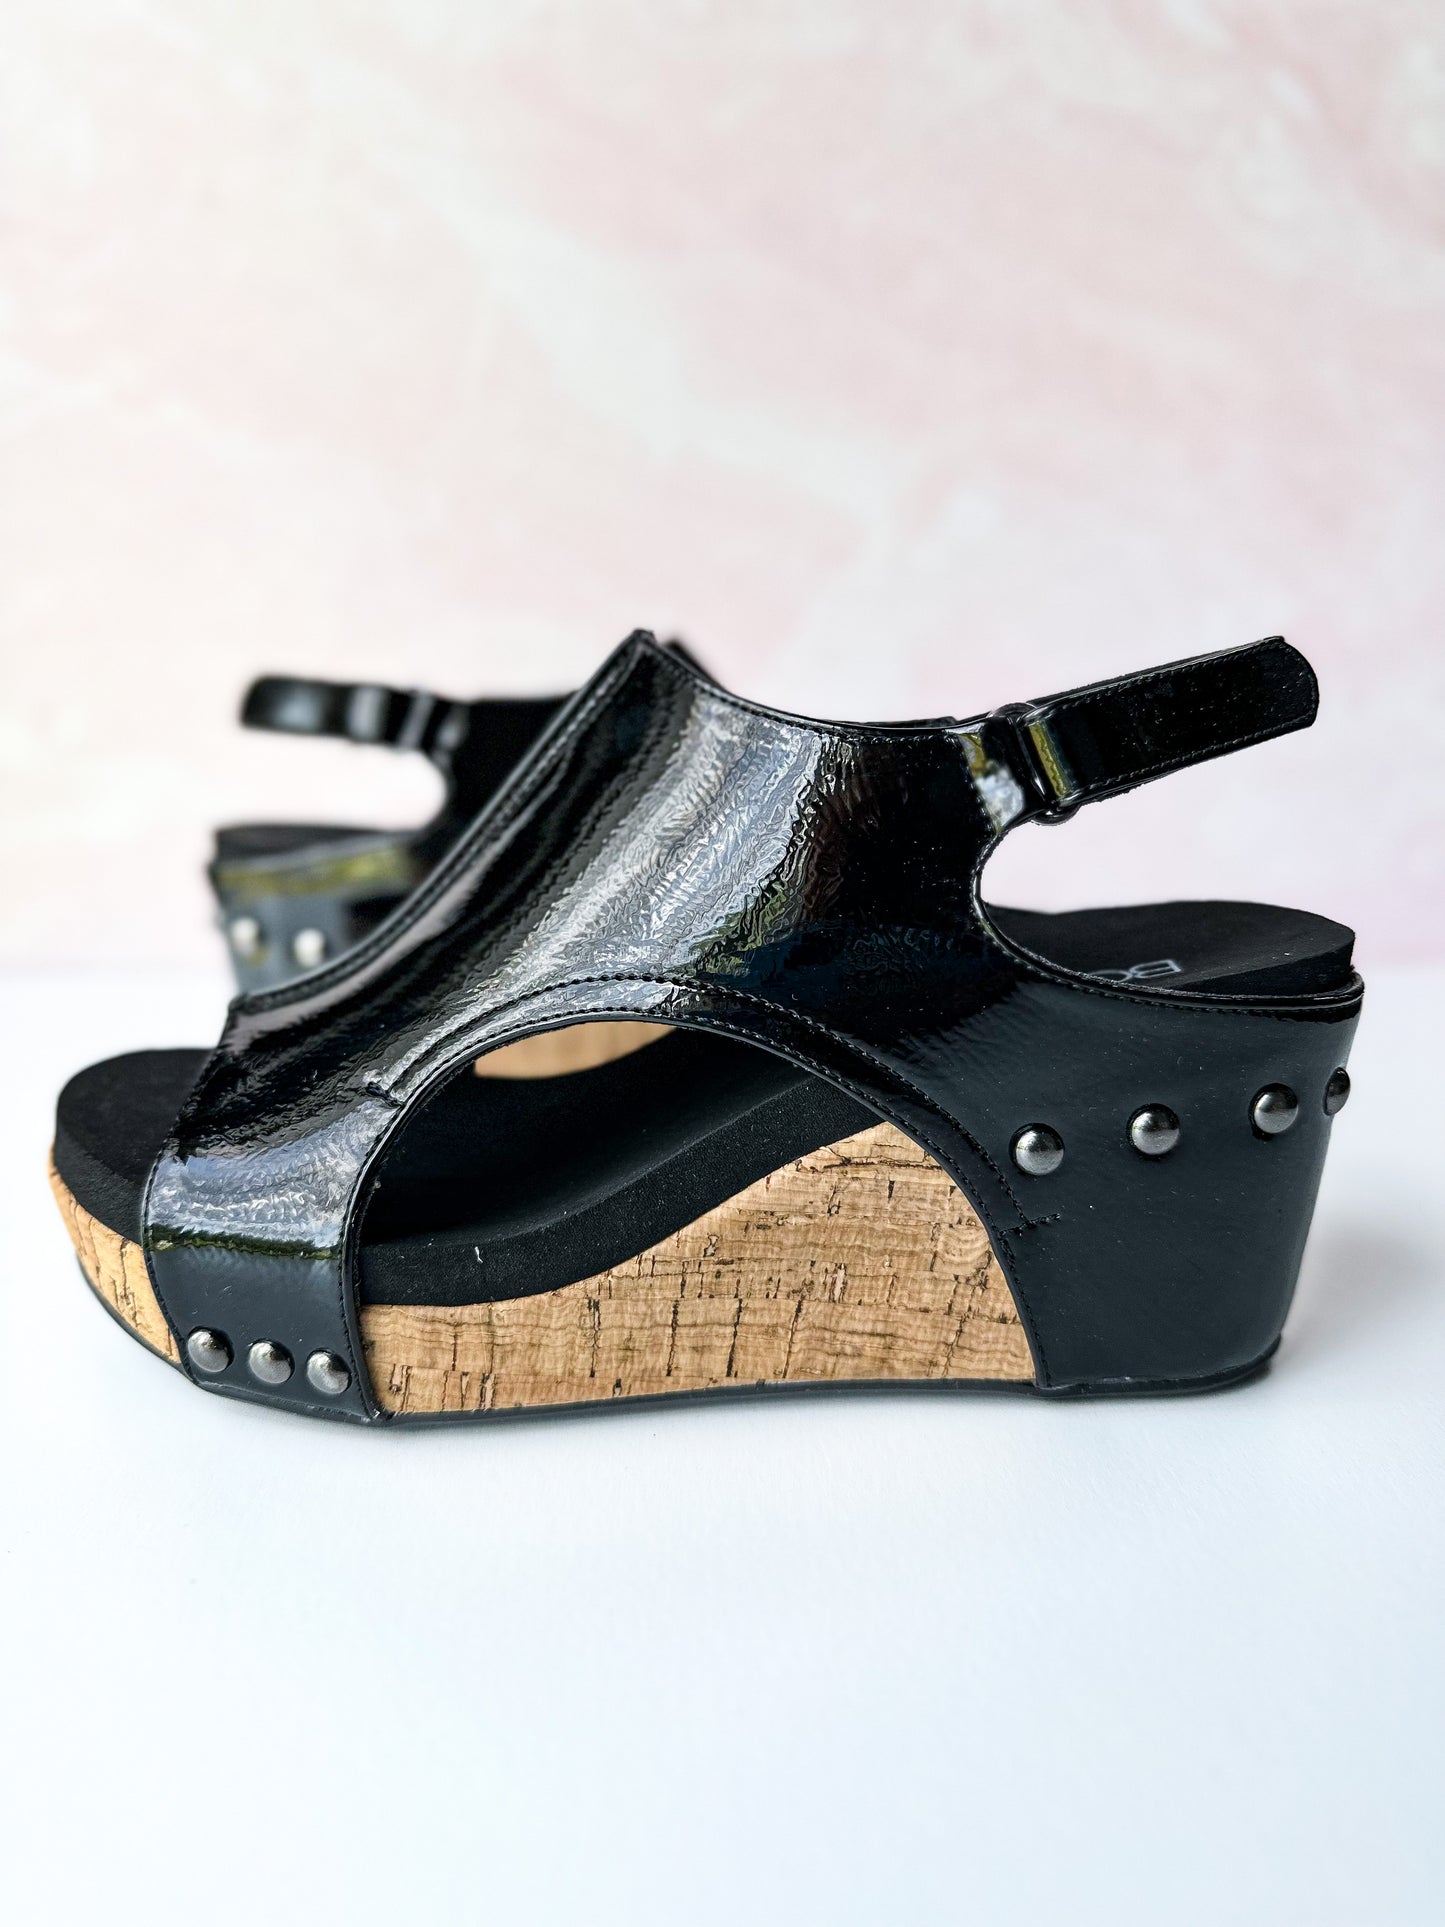 Corky's Carley Wedge - Black Patent